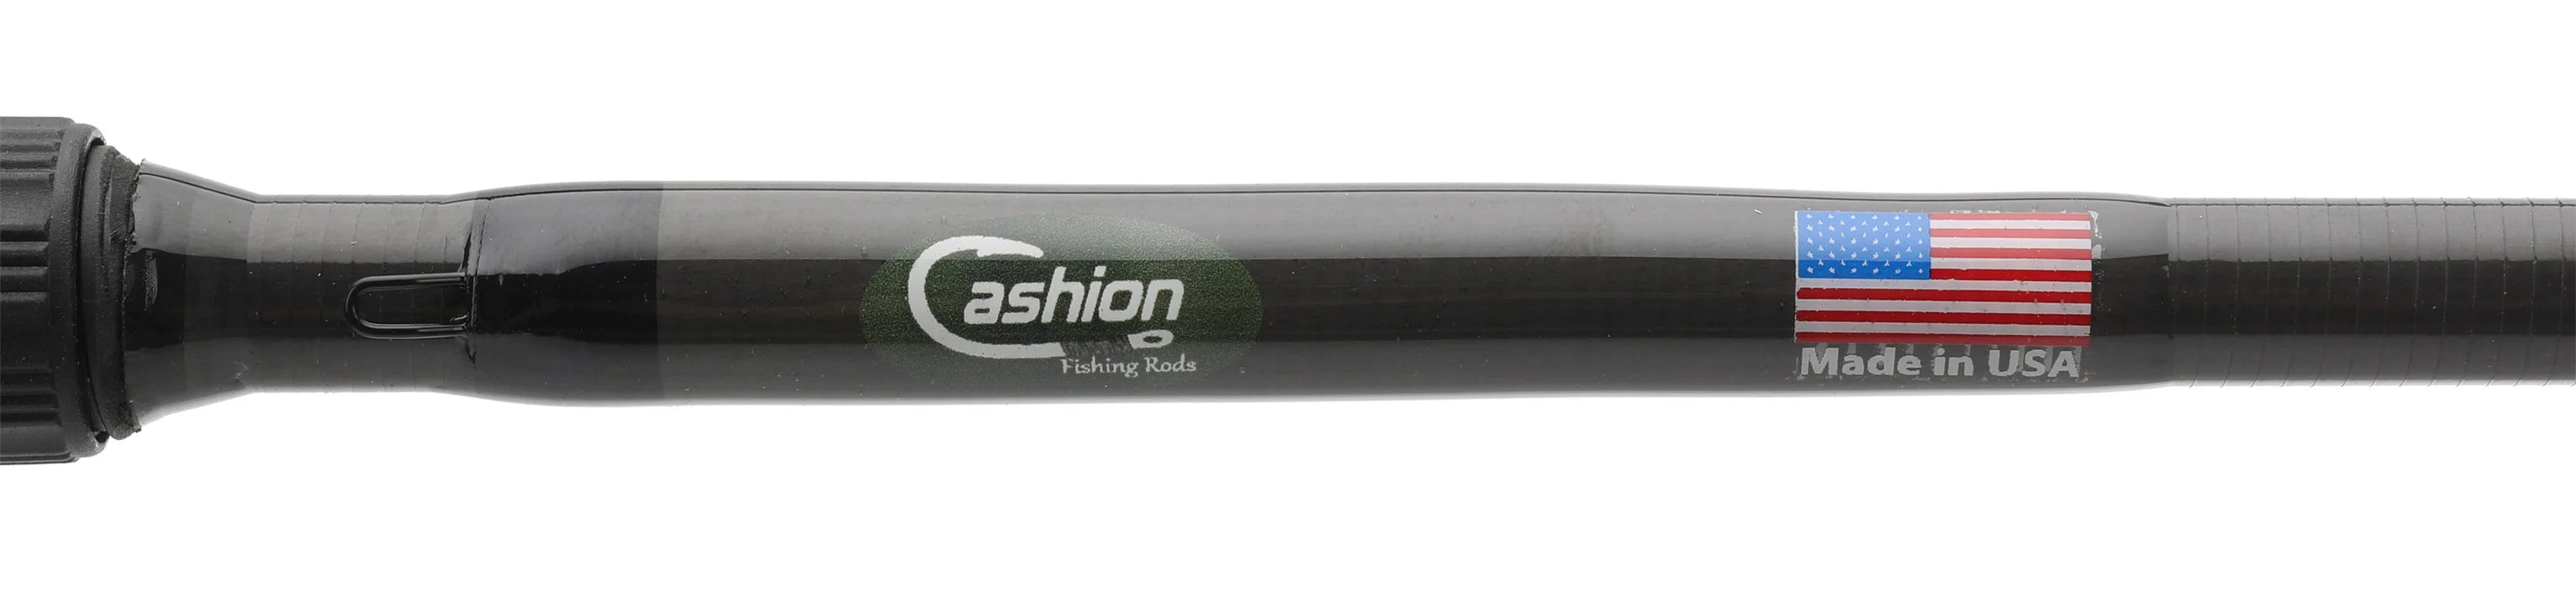 CASHION ICON FROG CASTING RODS - 0